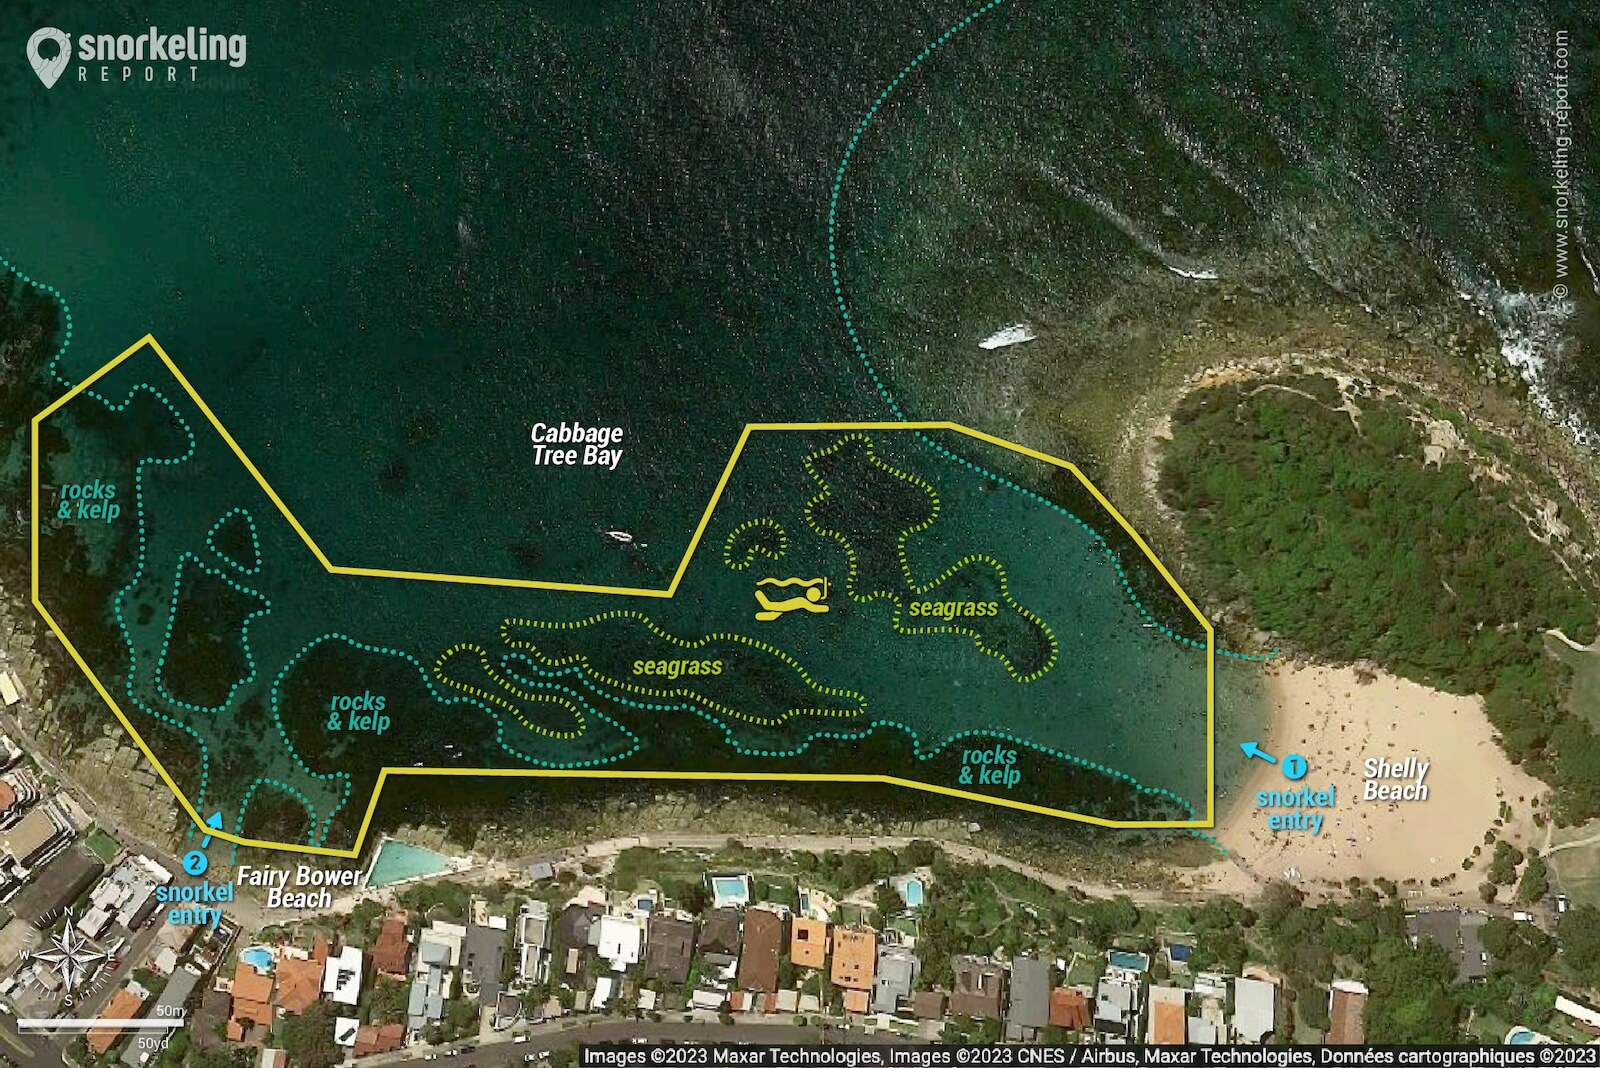 Shelly Beach - Cabbage Tree Bay snorkeling map.